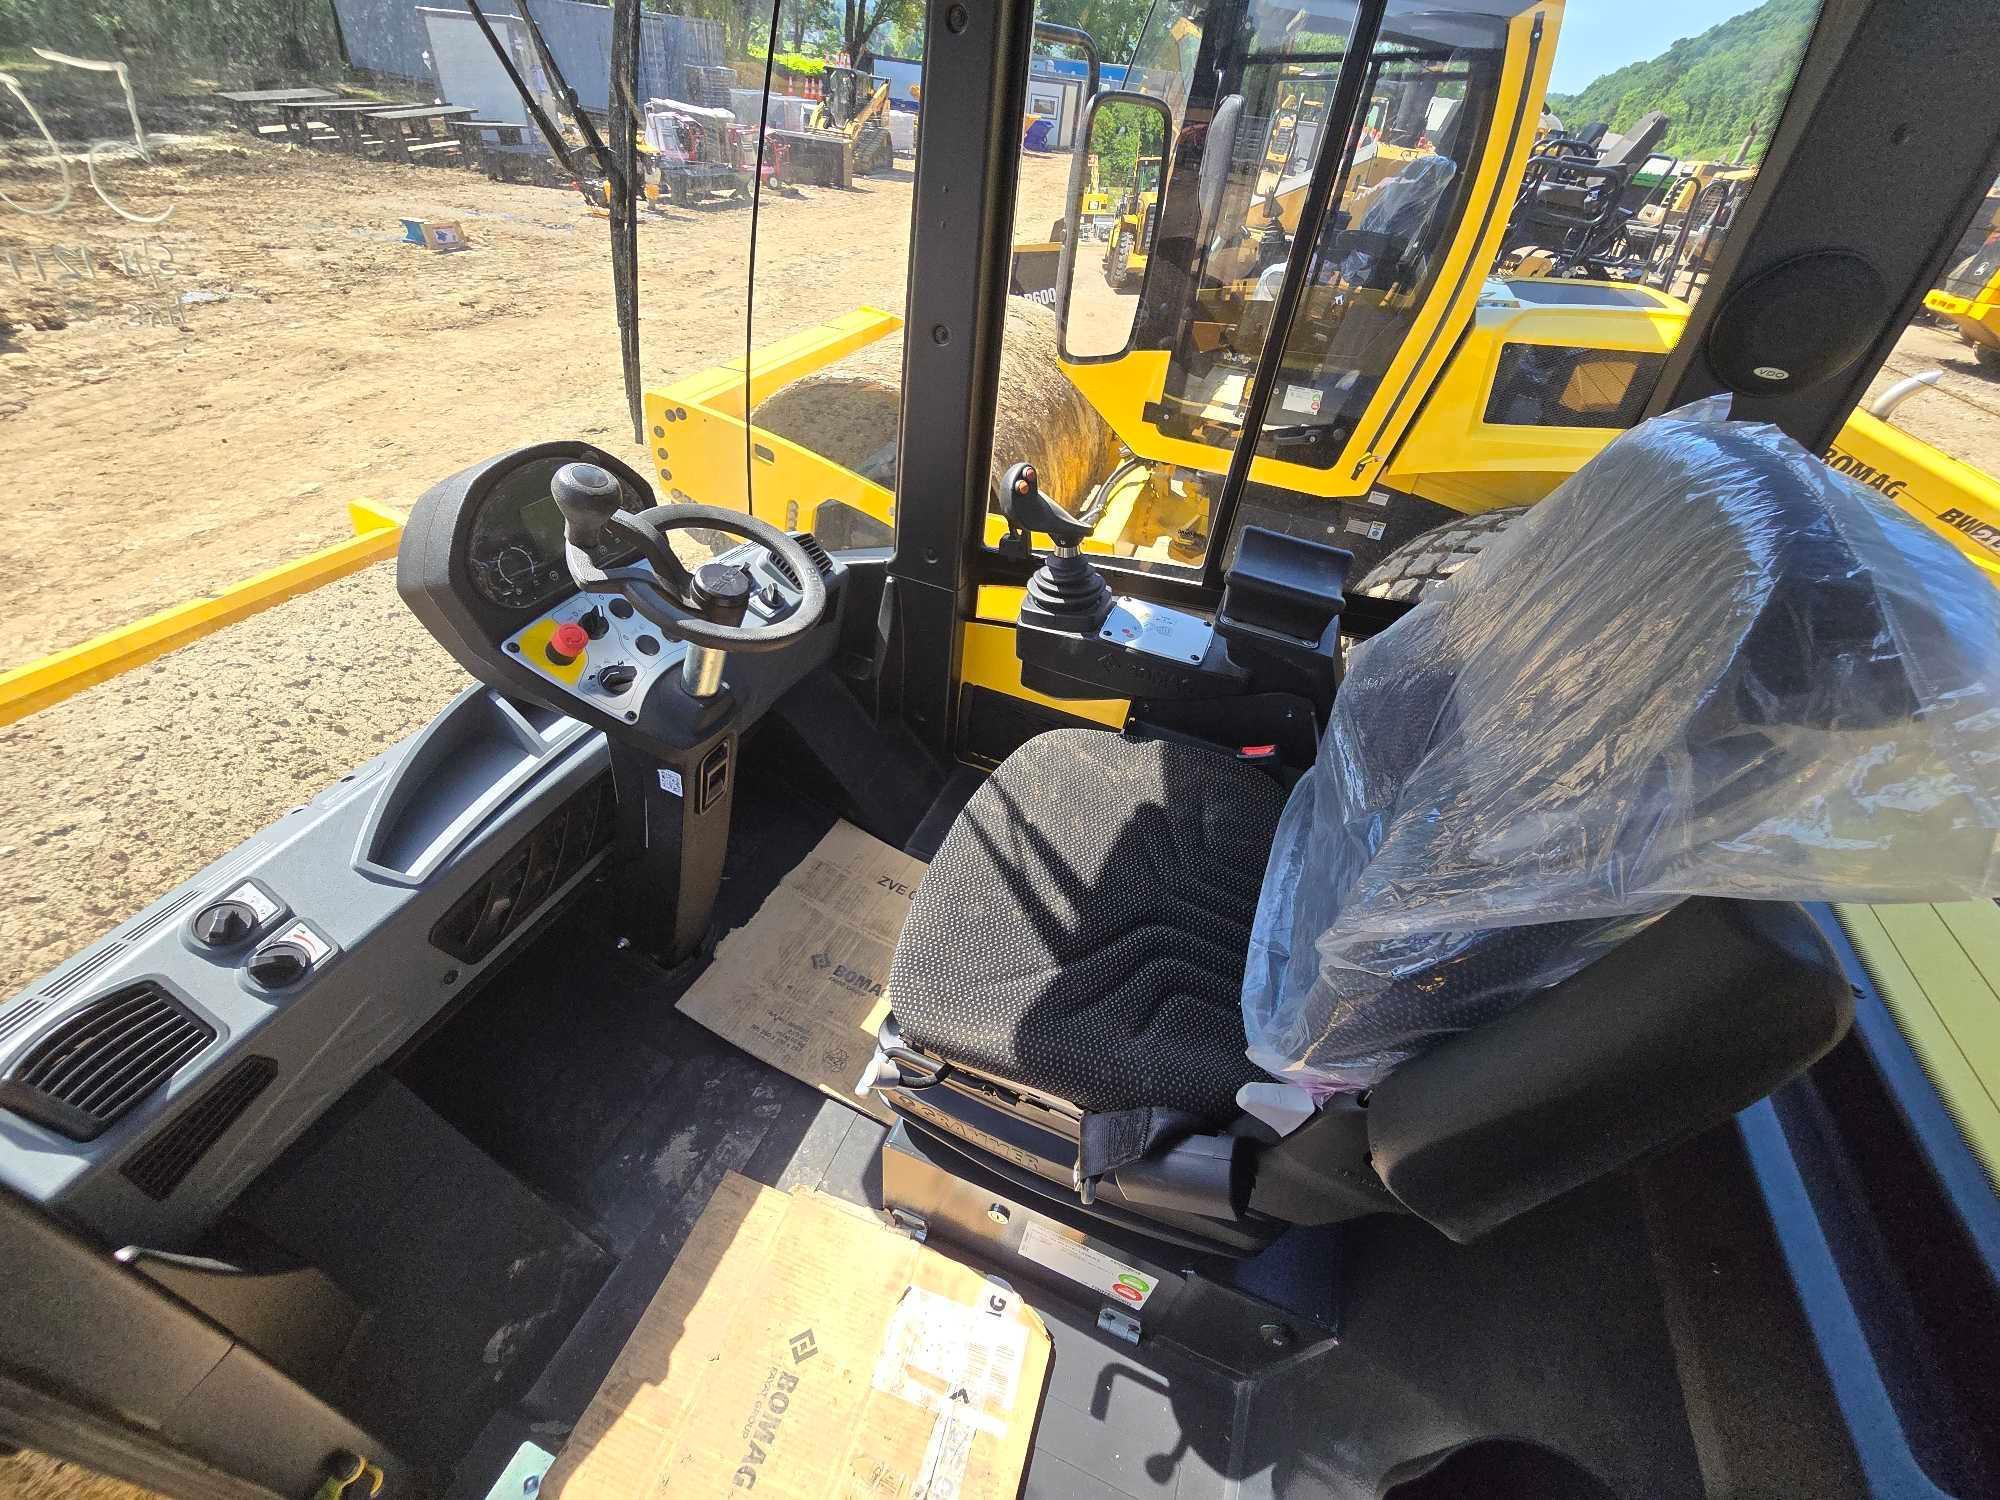 UNUSED BOMAG BW211D-6 VIBRATORY ROLLER SN-121115, powered by Deutz TCD 3.6L4 diesel engine, equipped